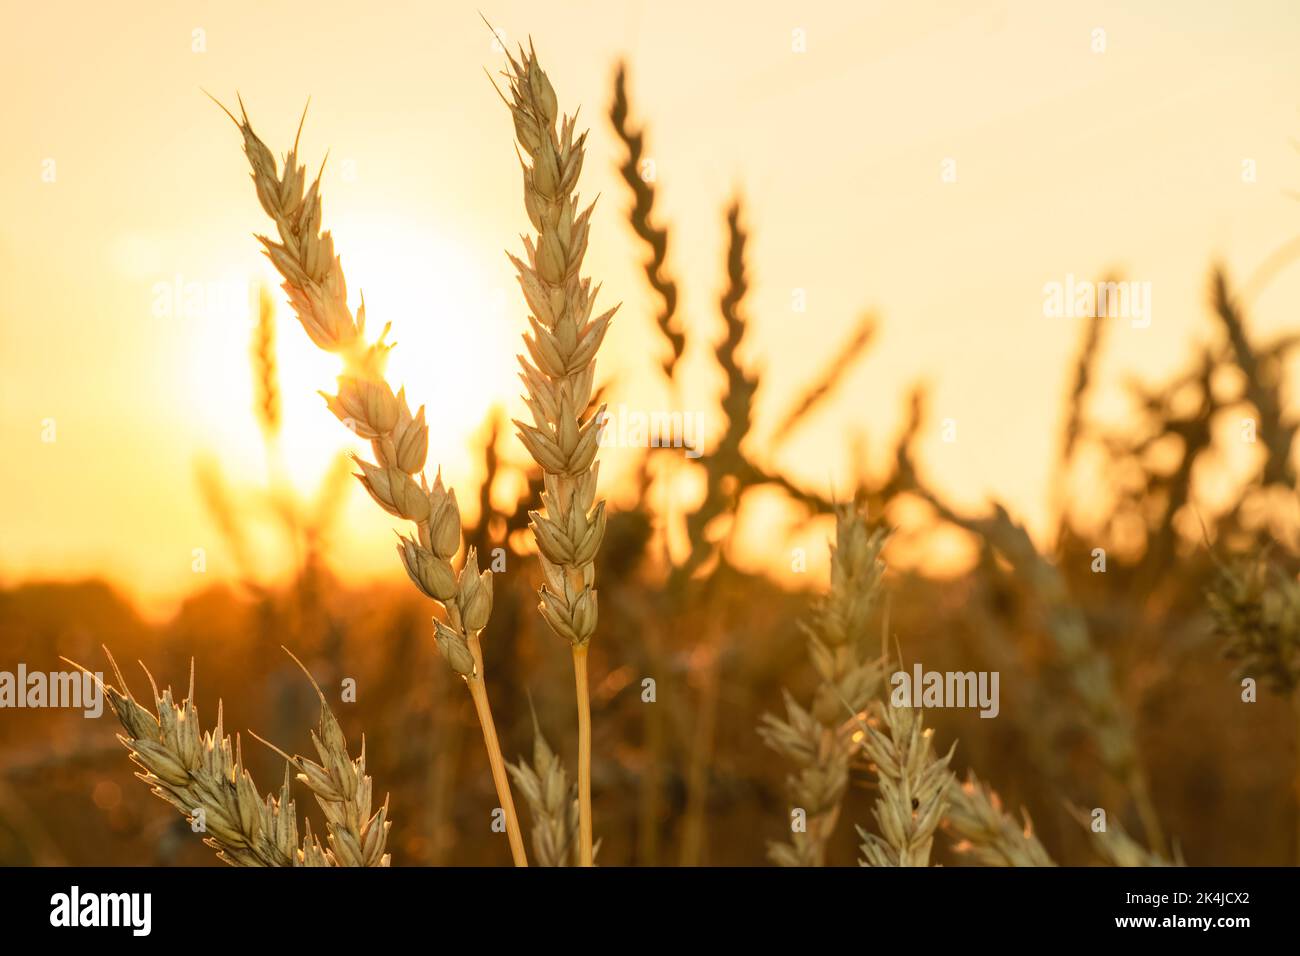 Golden Cereal field with ears of wheat,Agriculture farm and farming concept.Harvest.Wheat field.Rural Scenery.Ripening ears.Rancho harvest Concept.Rip Stock Photo